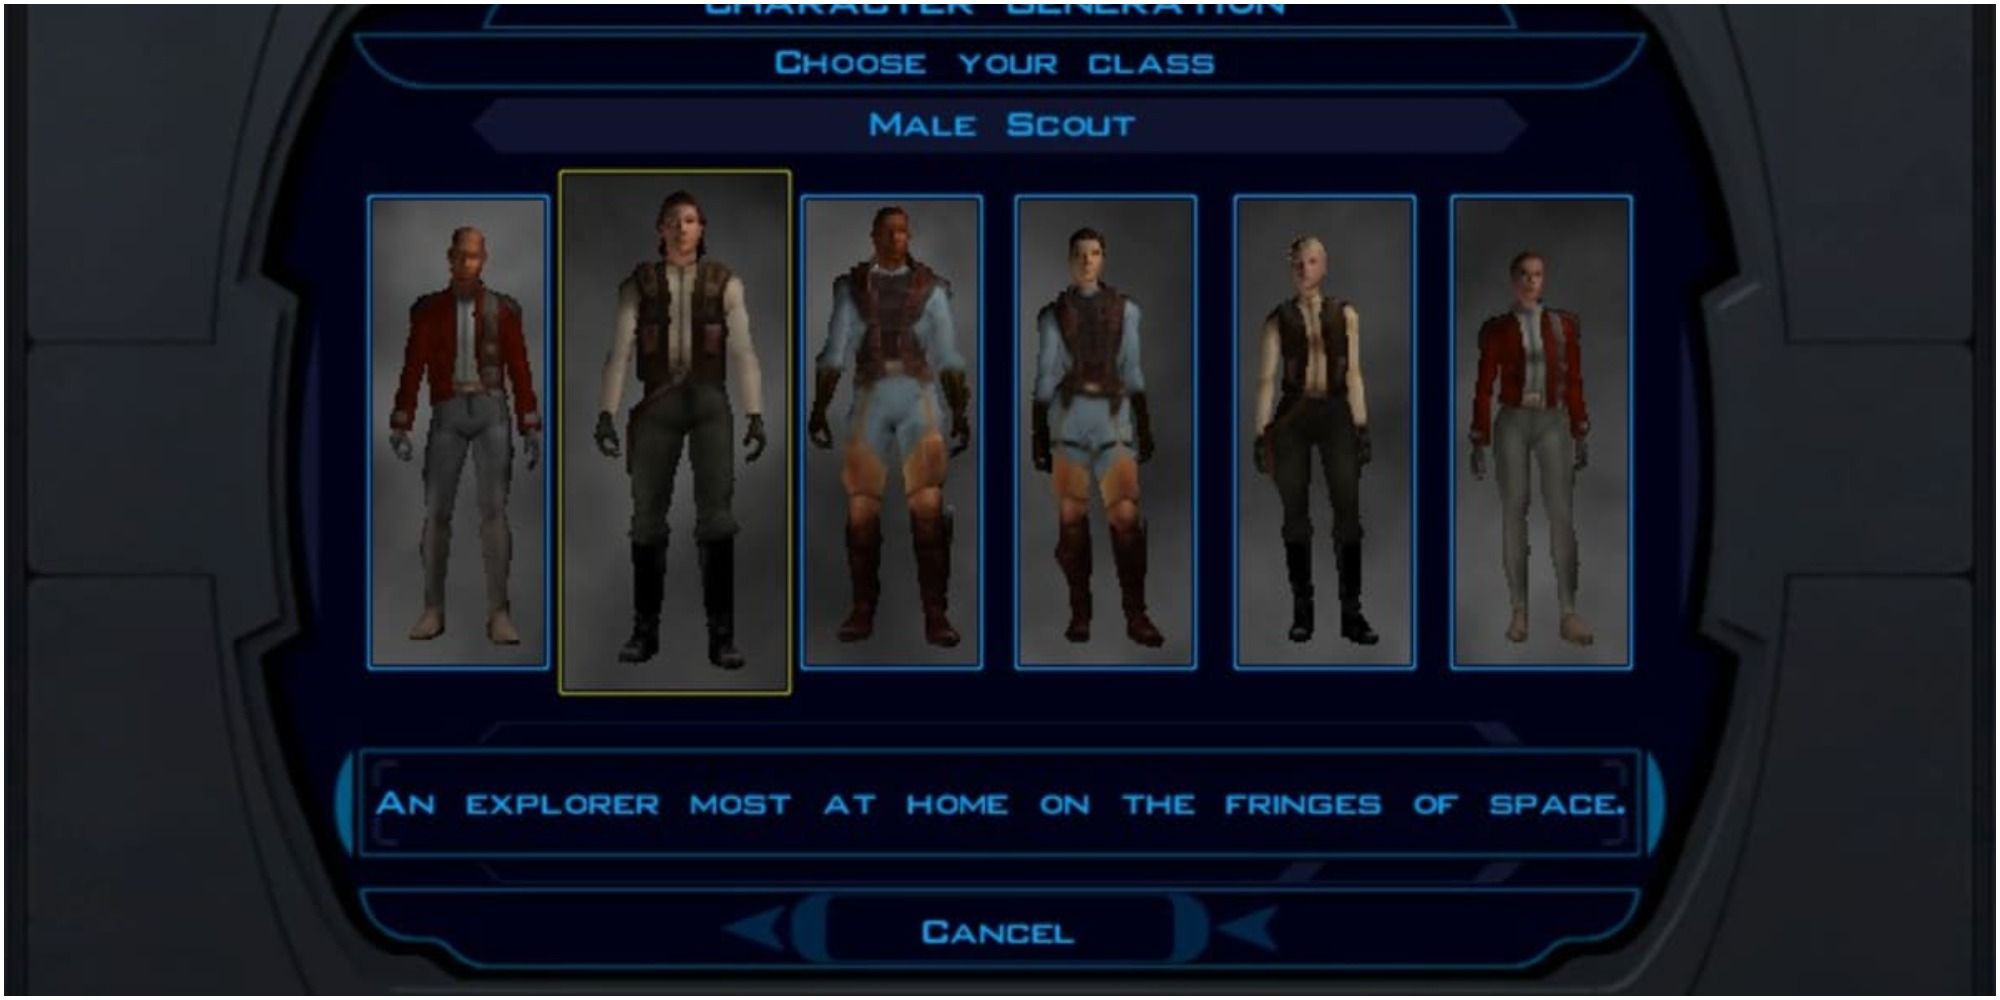 Star Wars knights of the old republic classes